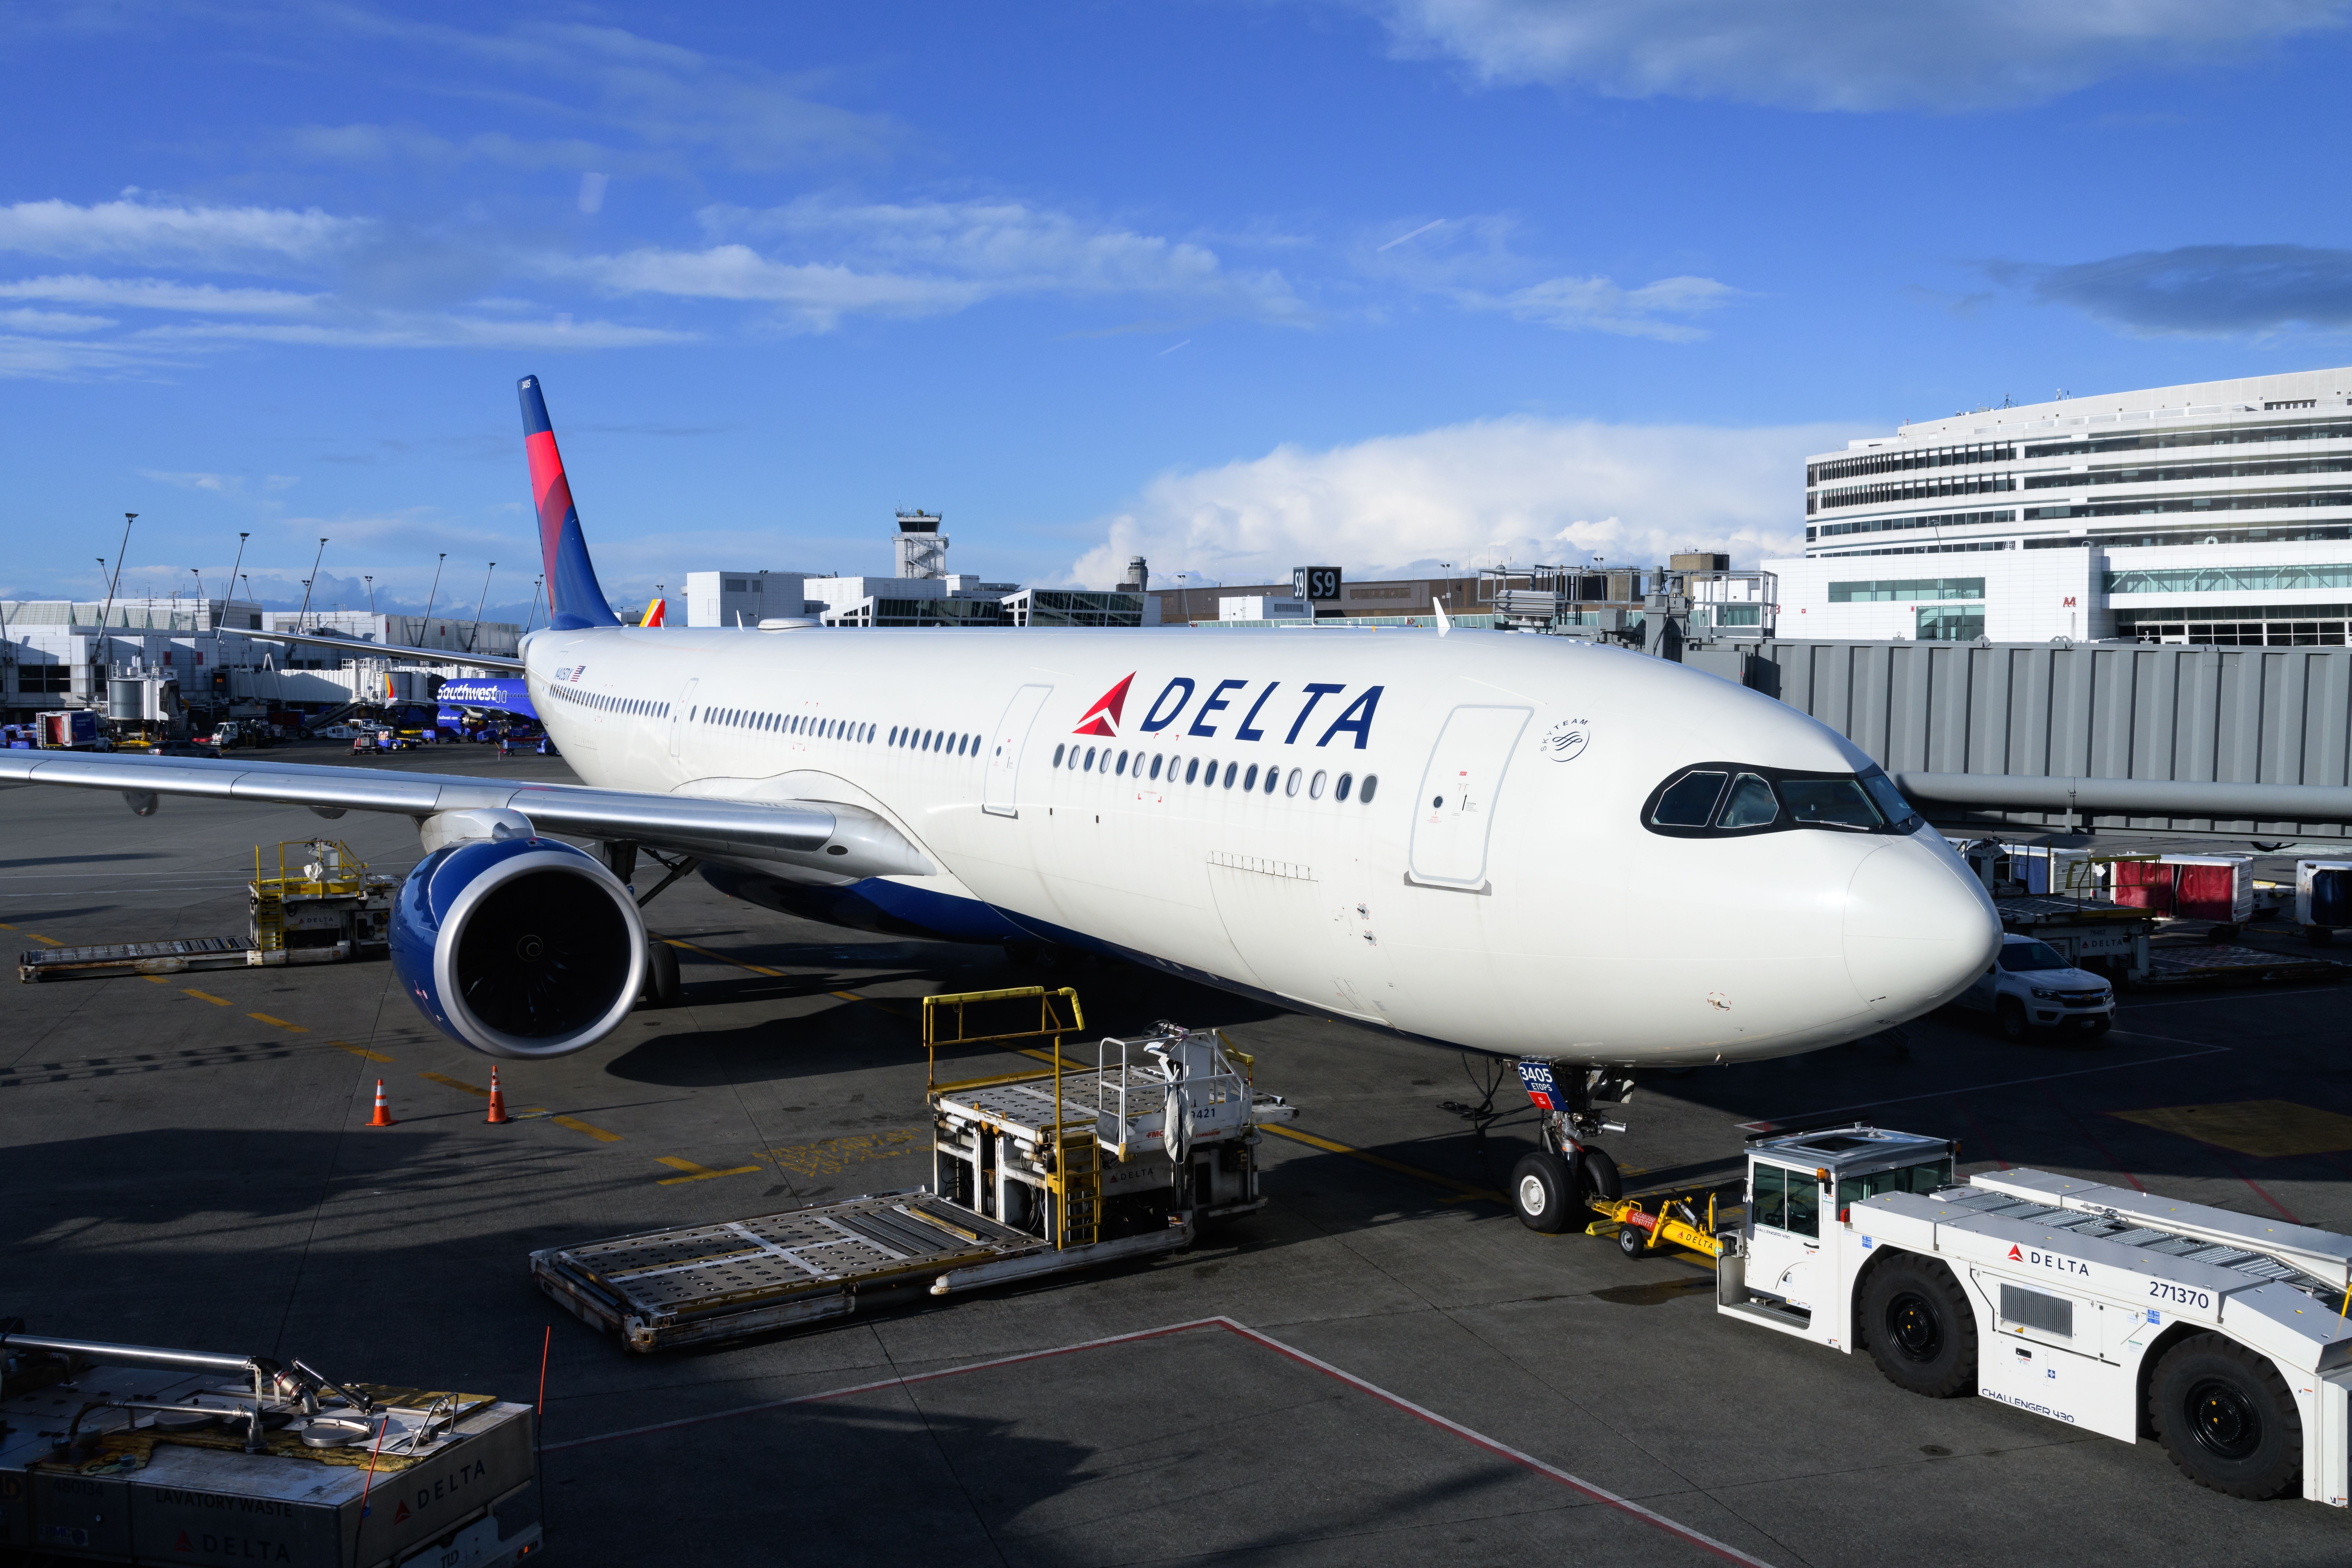 Delta Airlines Airbus A330-900 aircraft at Seatac south terminal with tug